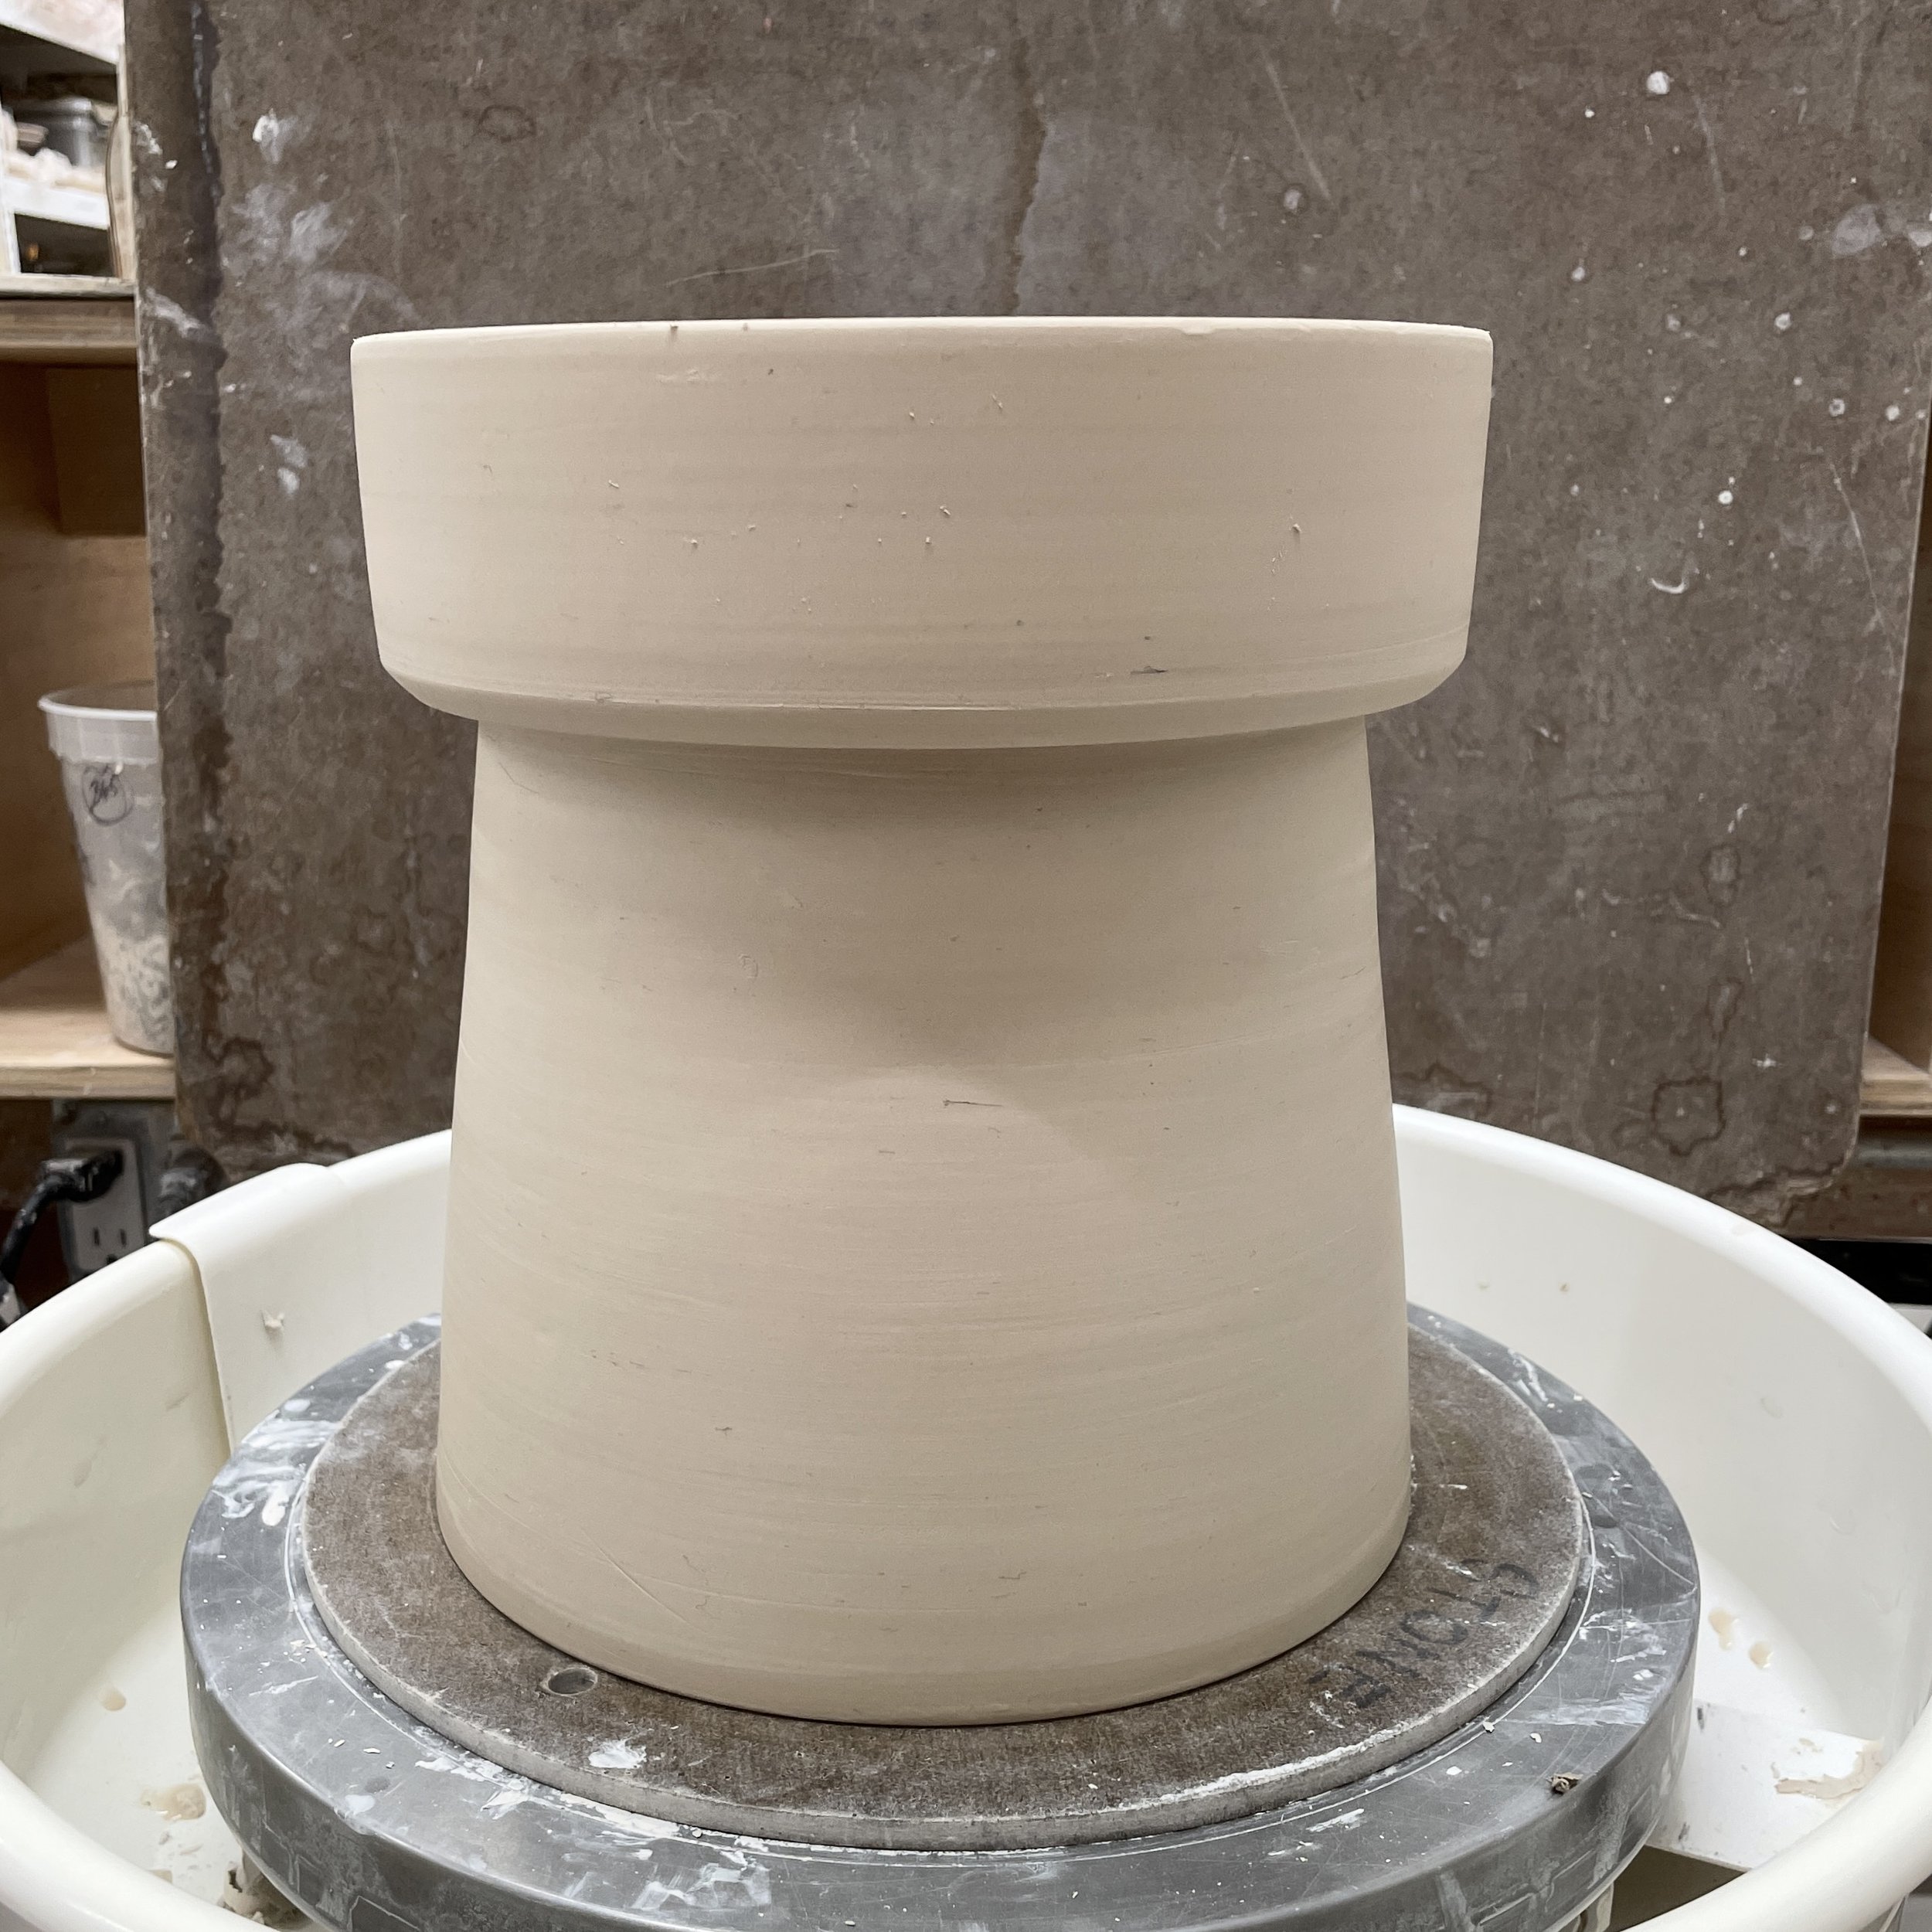 Pedestal bowl after joining top and bottom